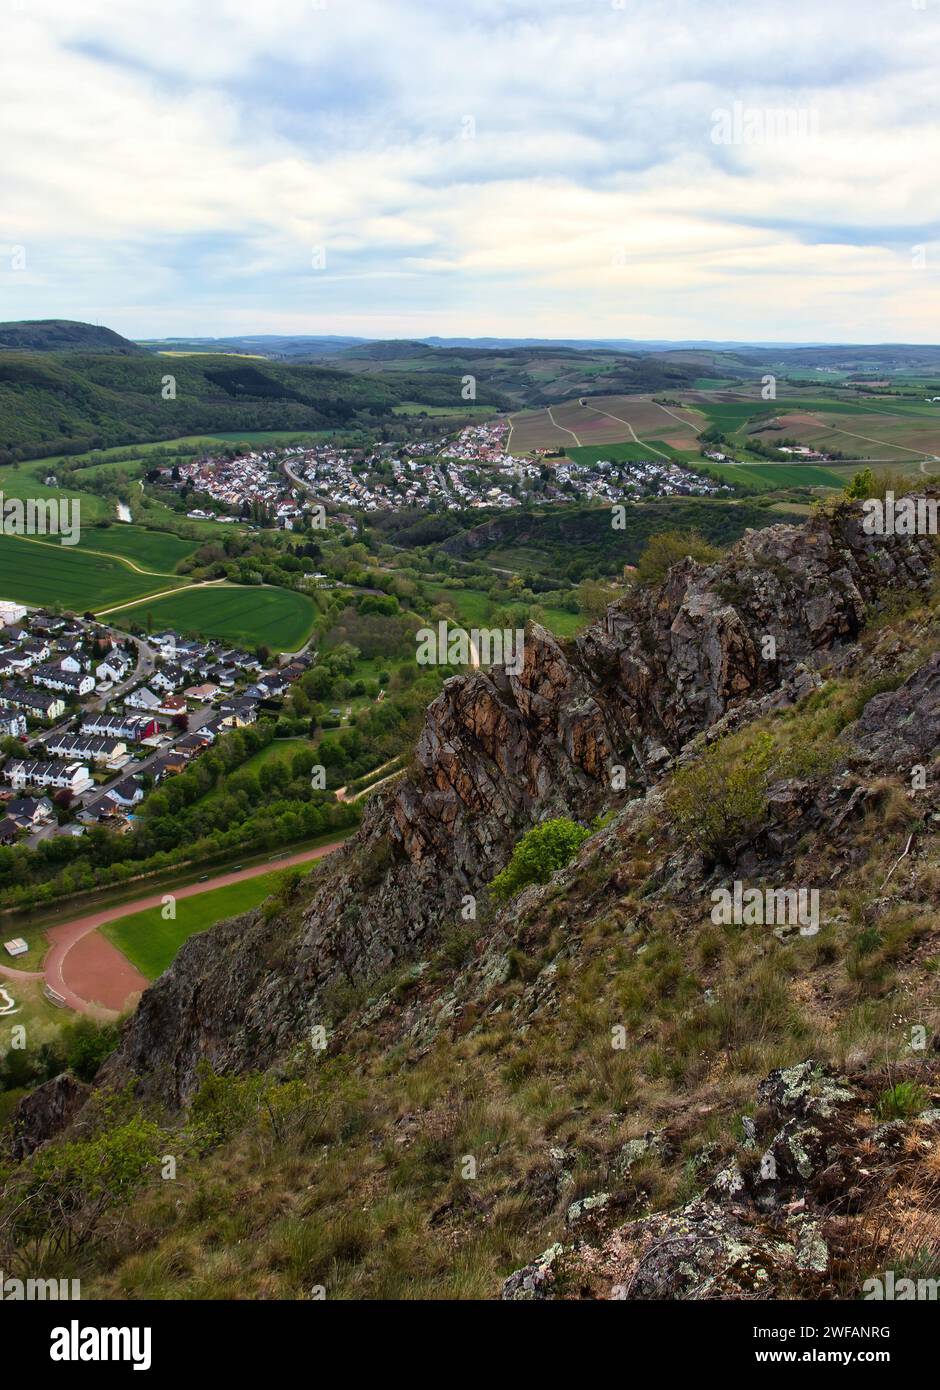 Bad Munster, Germany - May 9, 2021: Side of Rotenfels cliff overlooking German towns surrounded by green fields and hills on a sprint day. Stock Photo